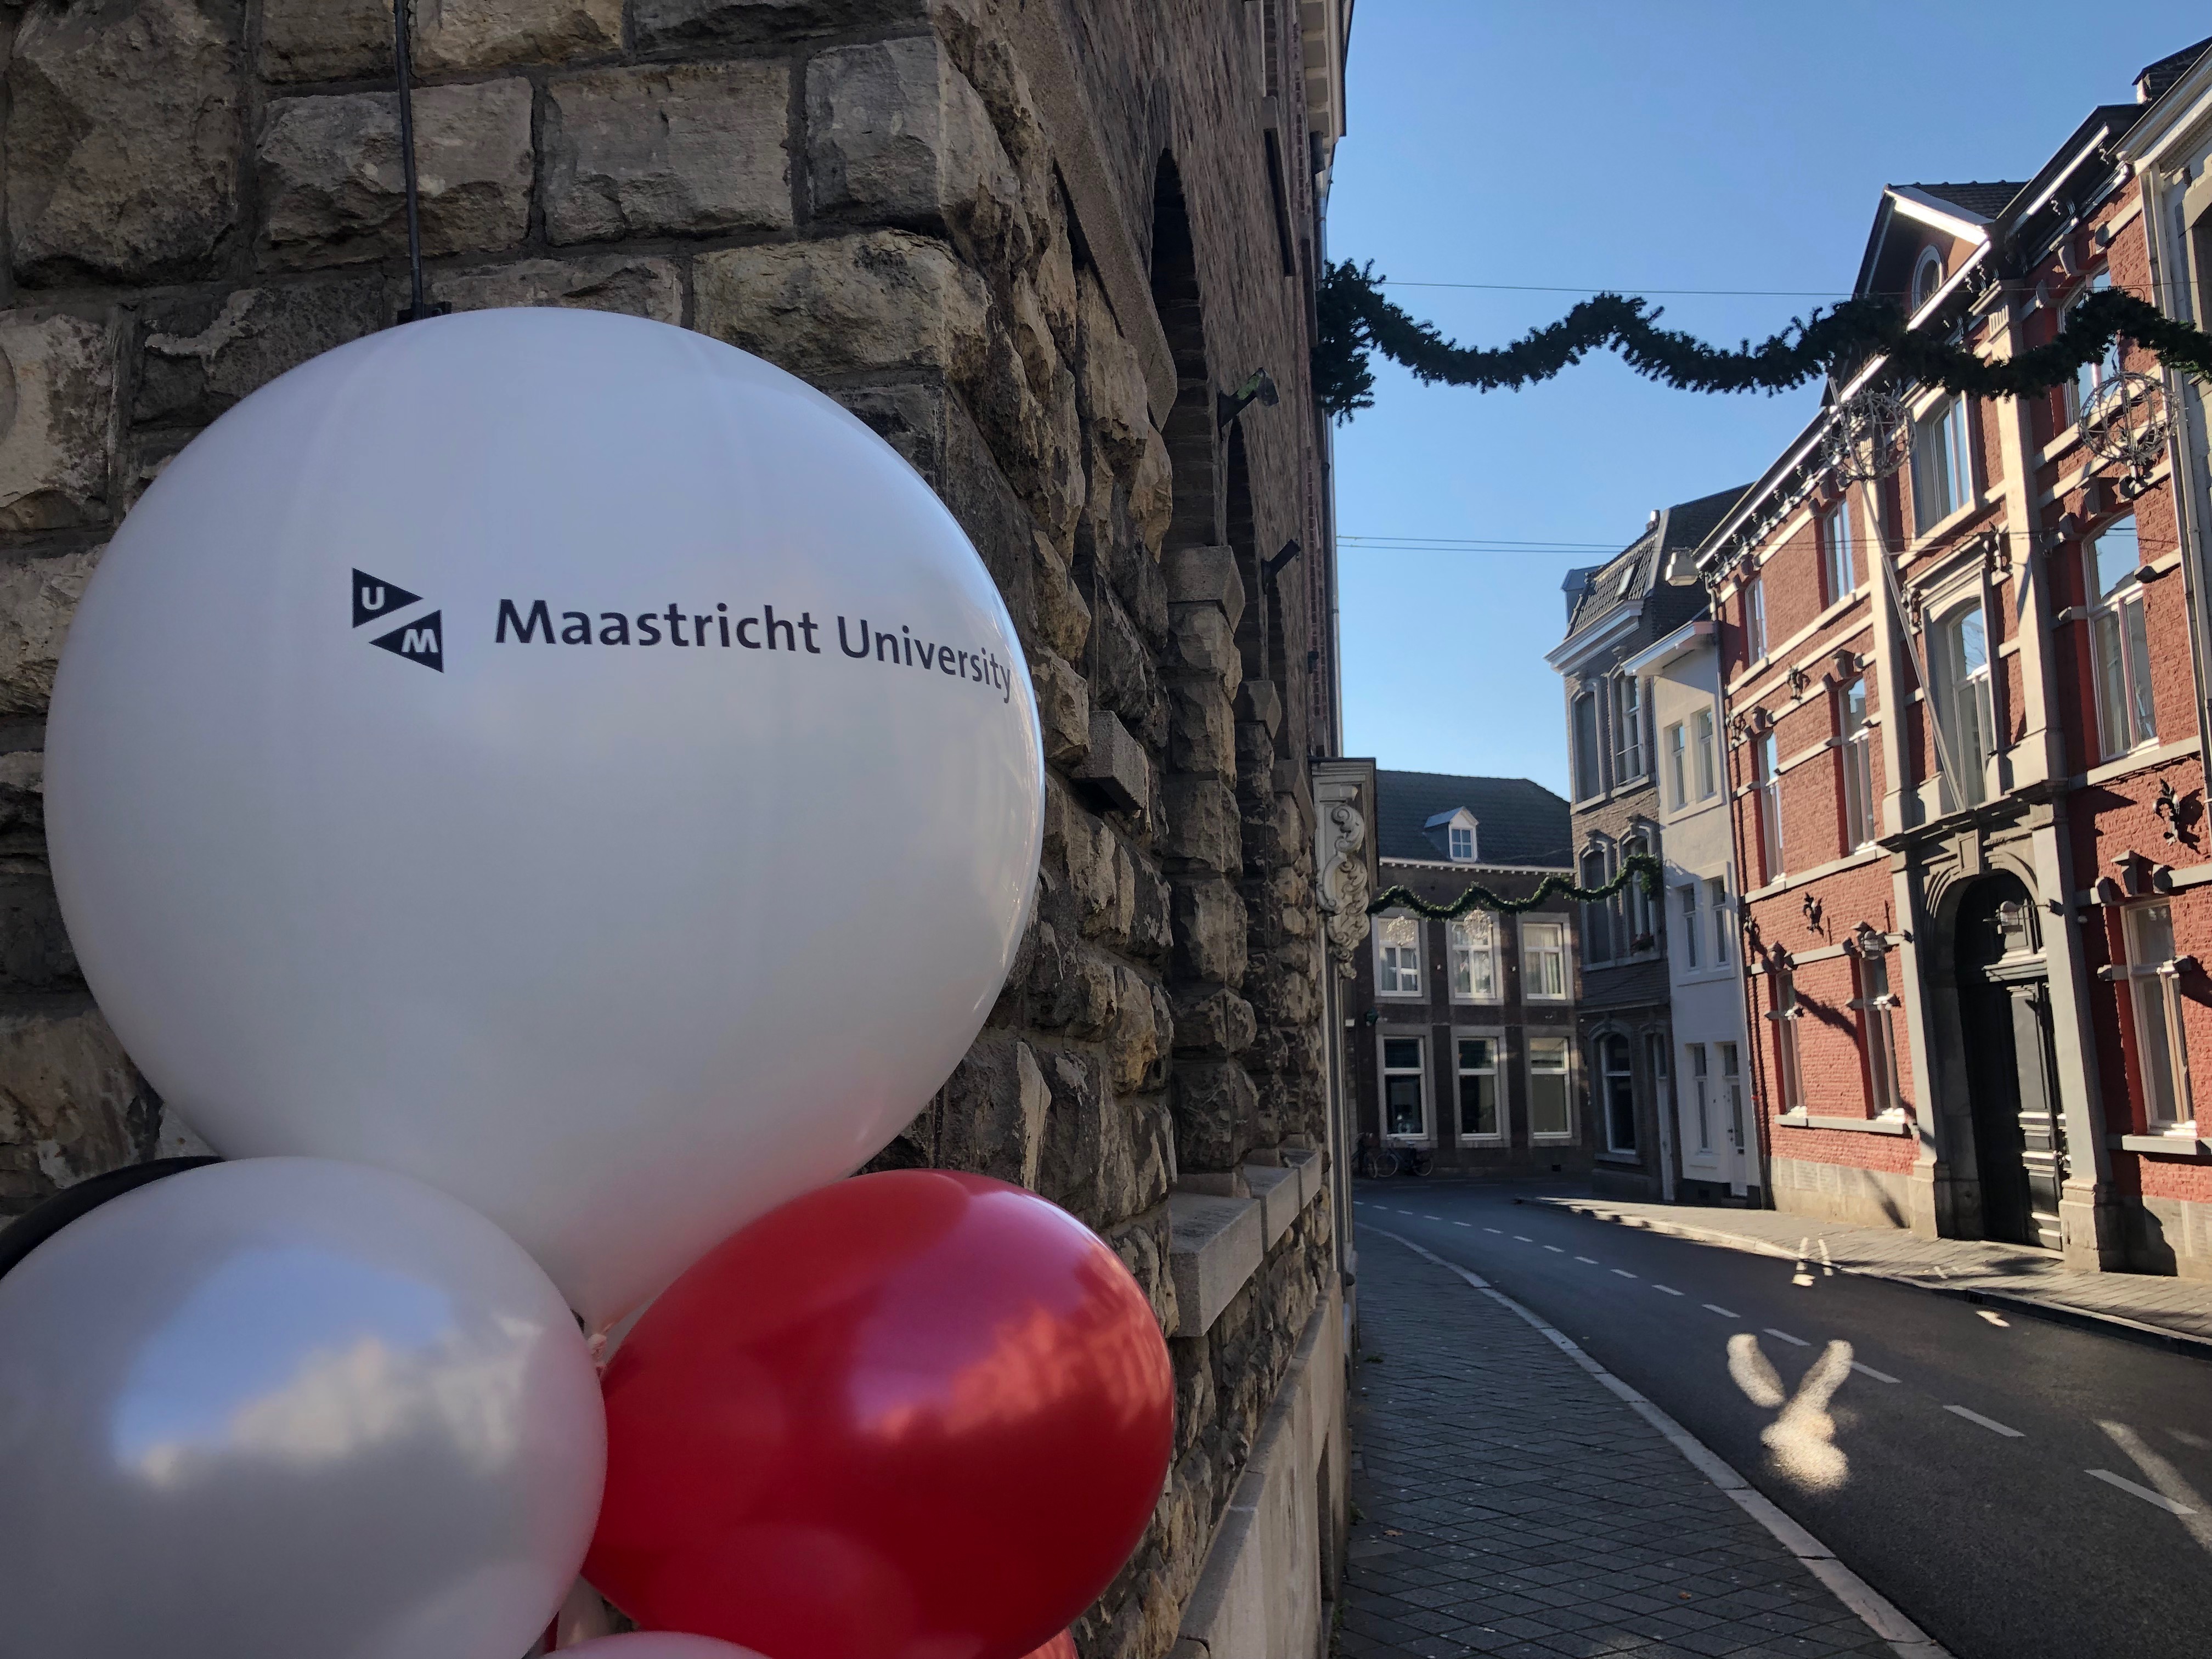 Master's Open Day